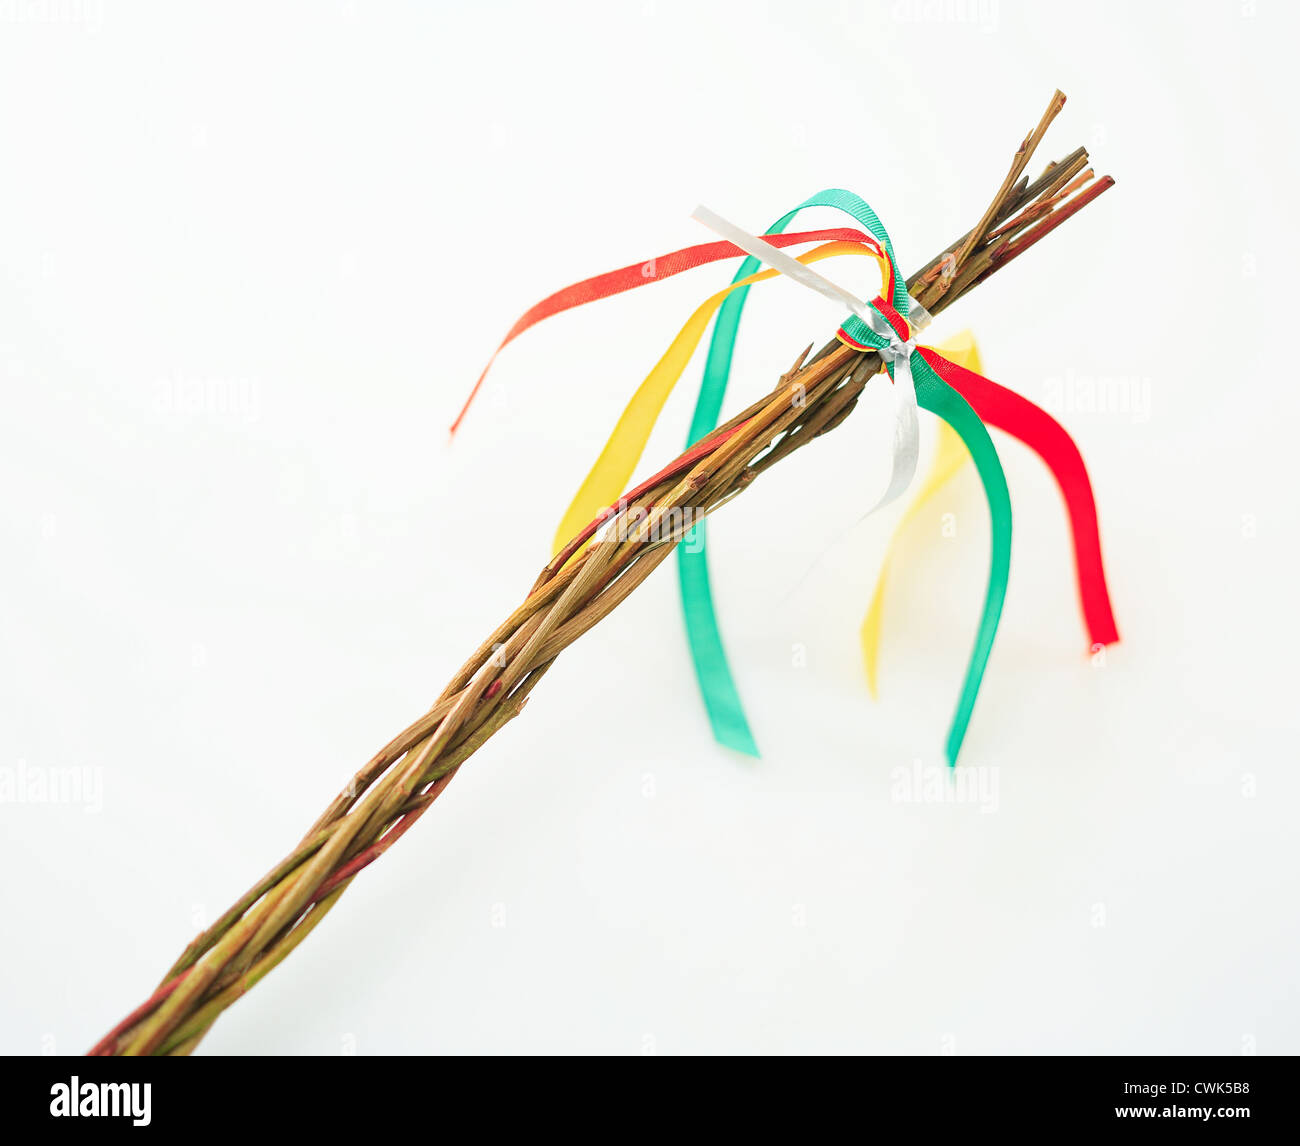 Easter Whip Stock Photo: 50208460 - Alamy